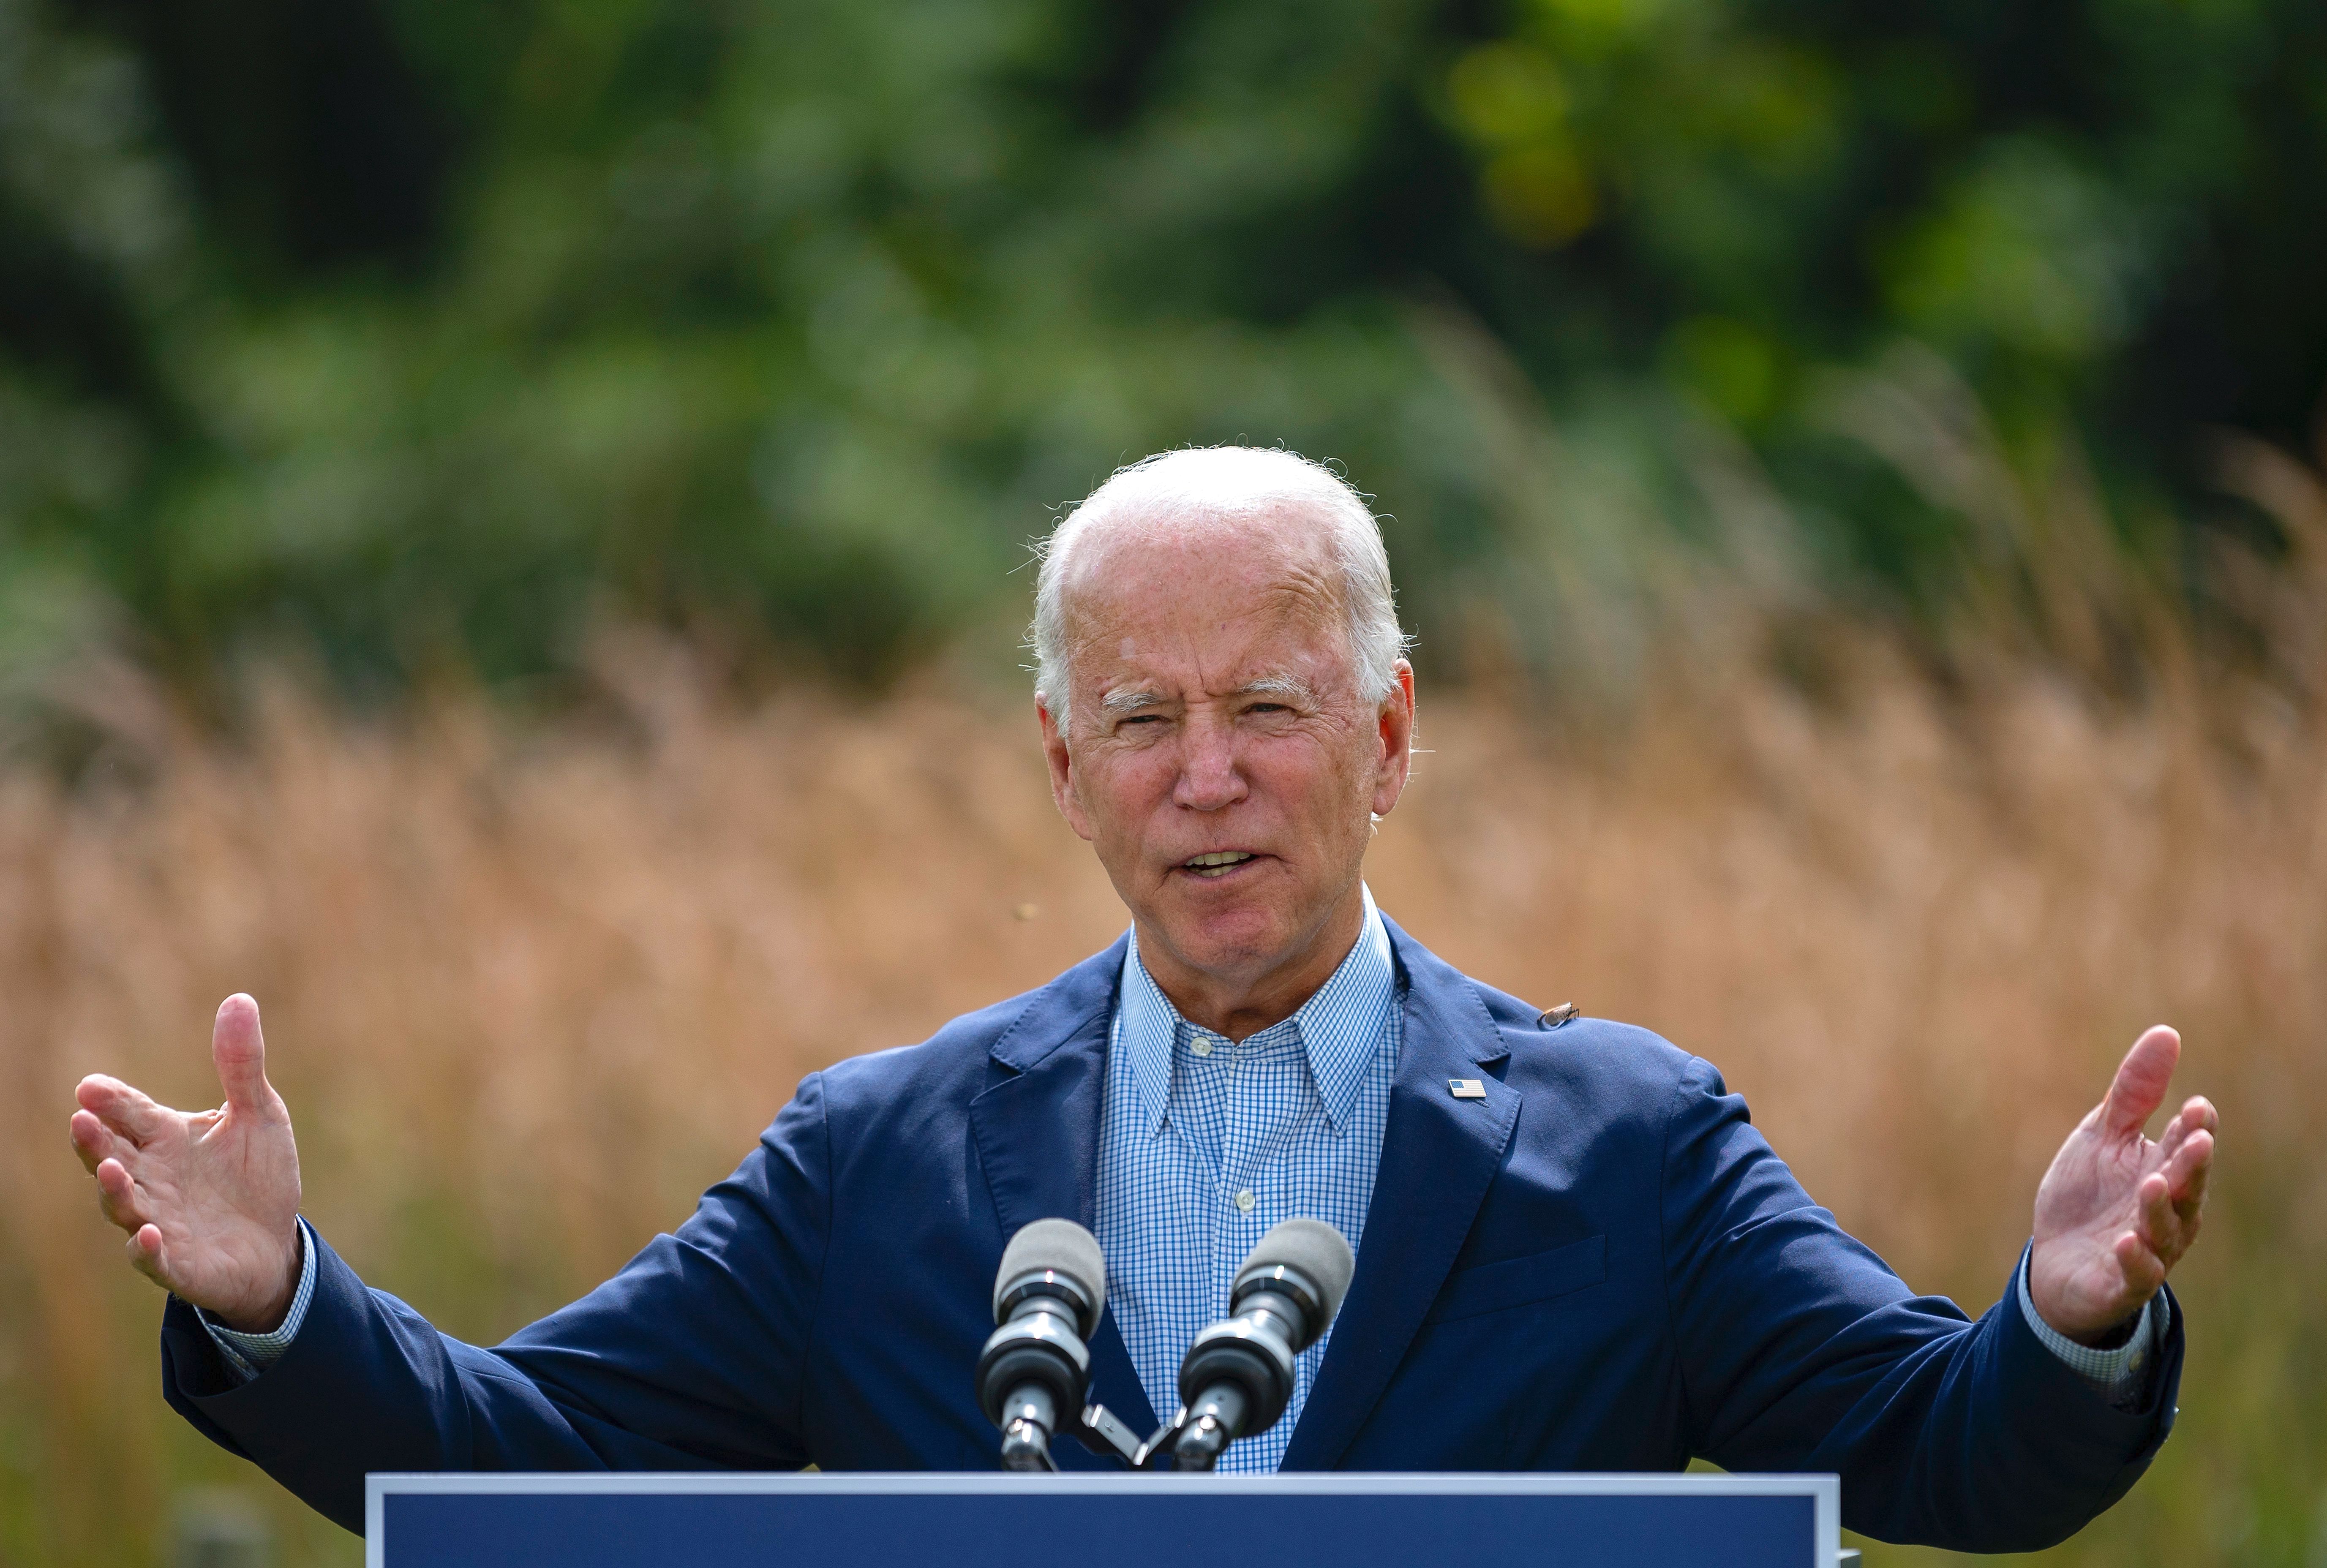 Biden campaigned on climate.